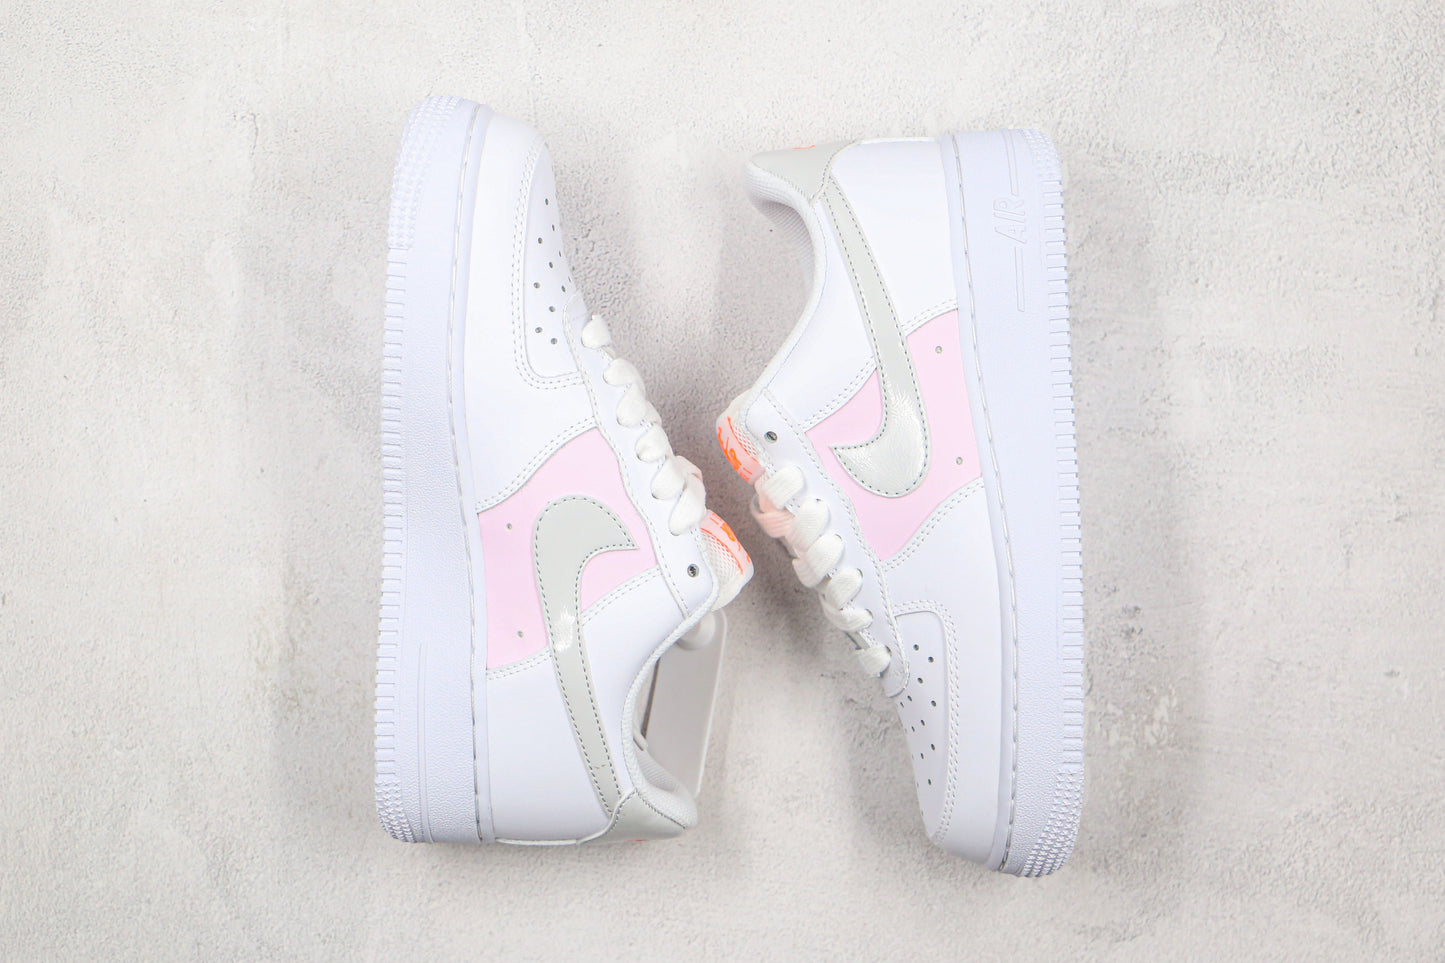 Air Force 1 '07 "White Pink"